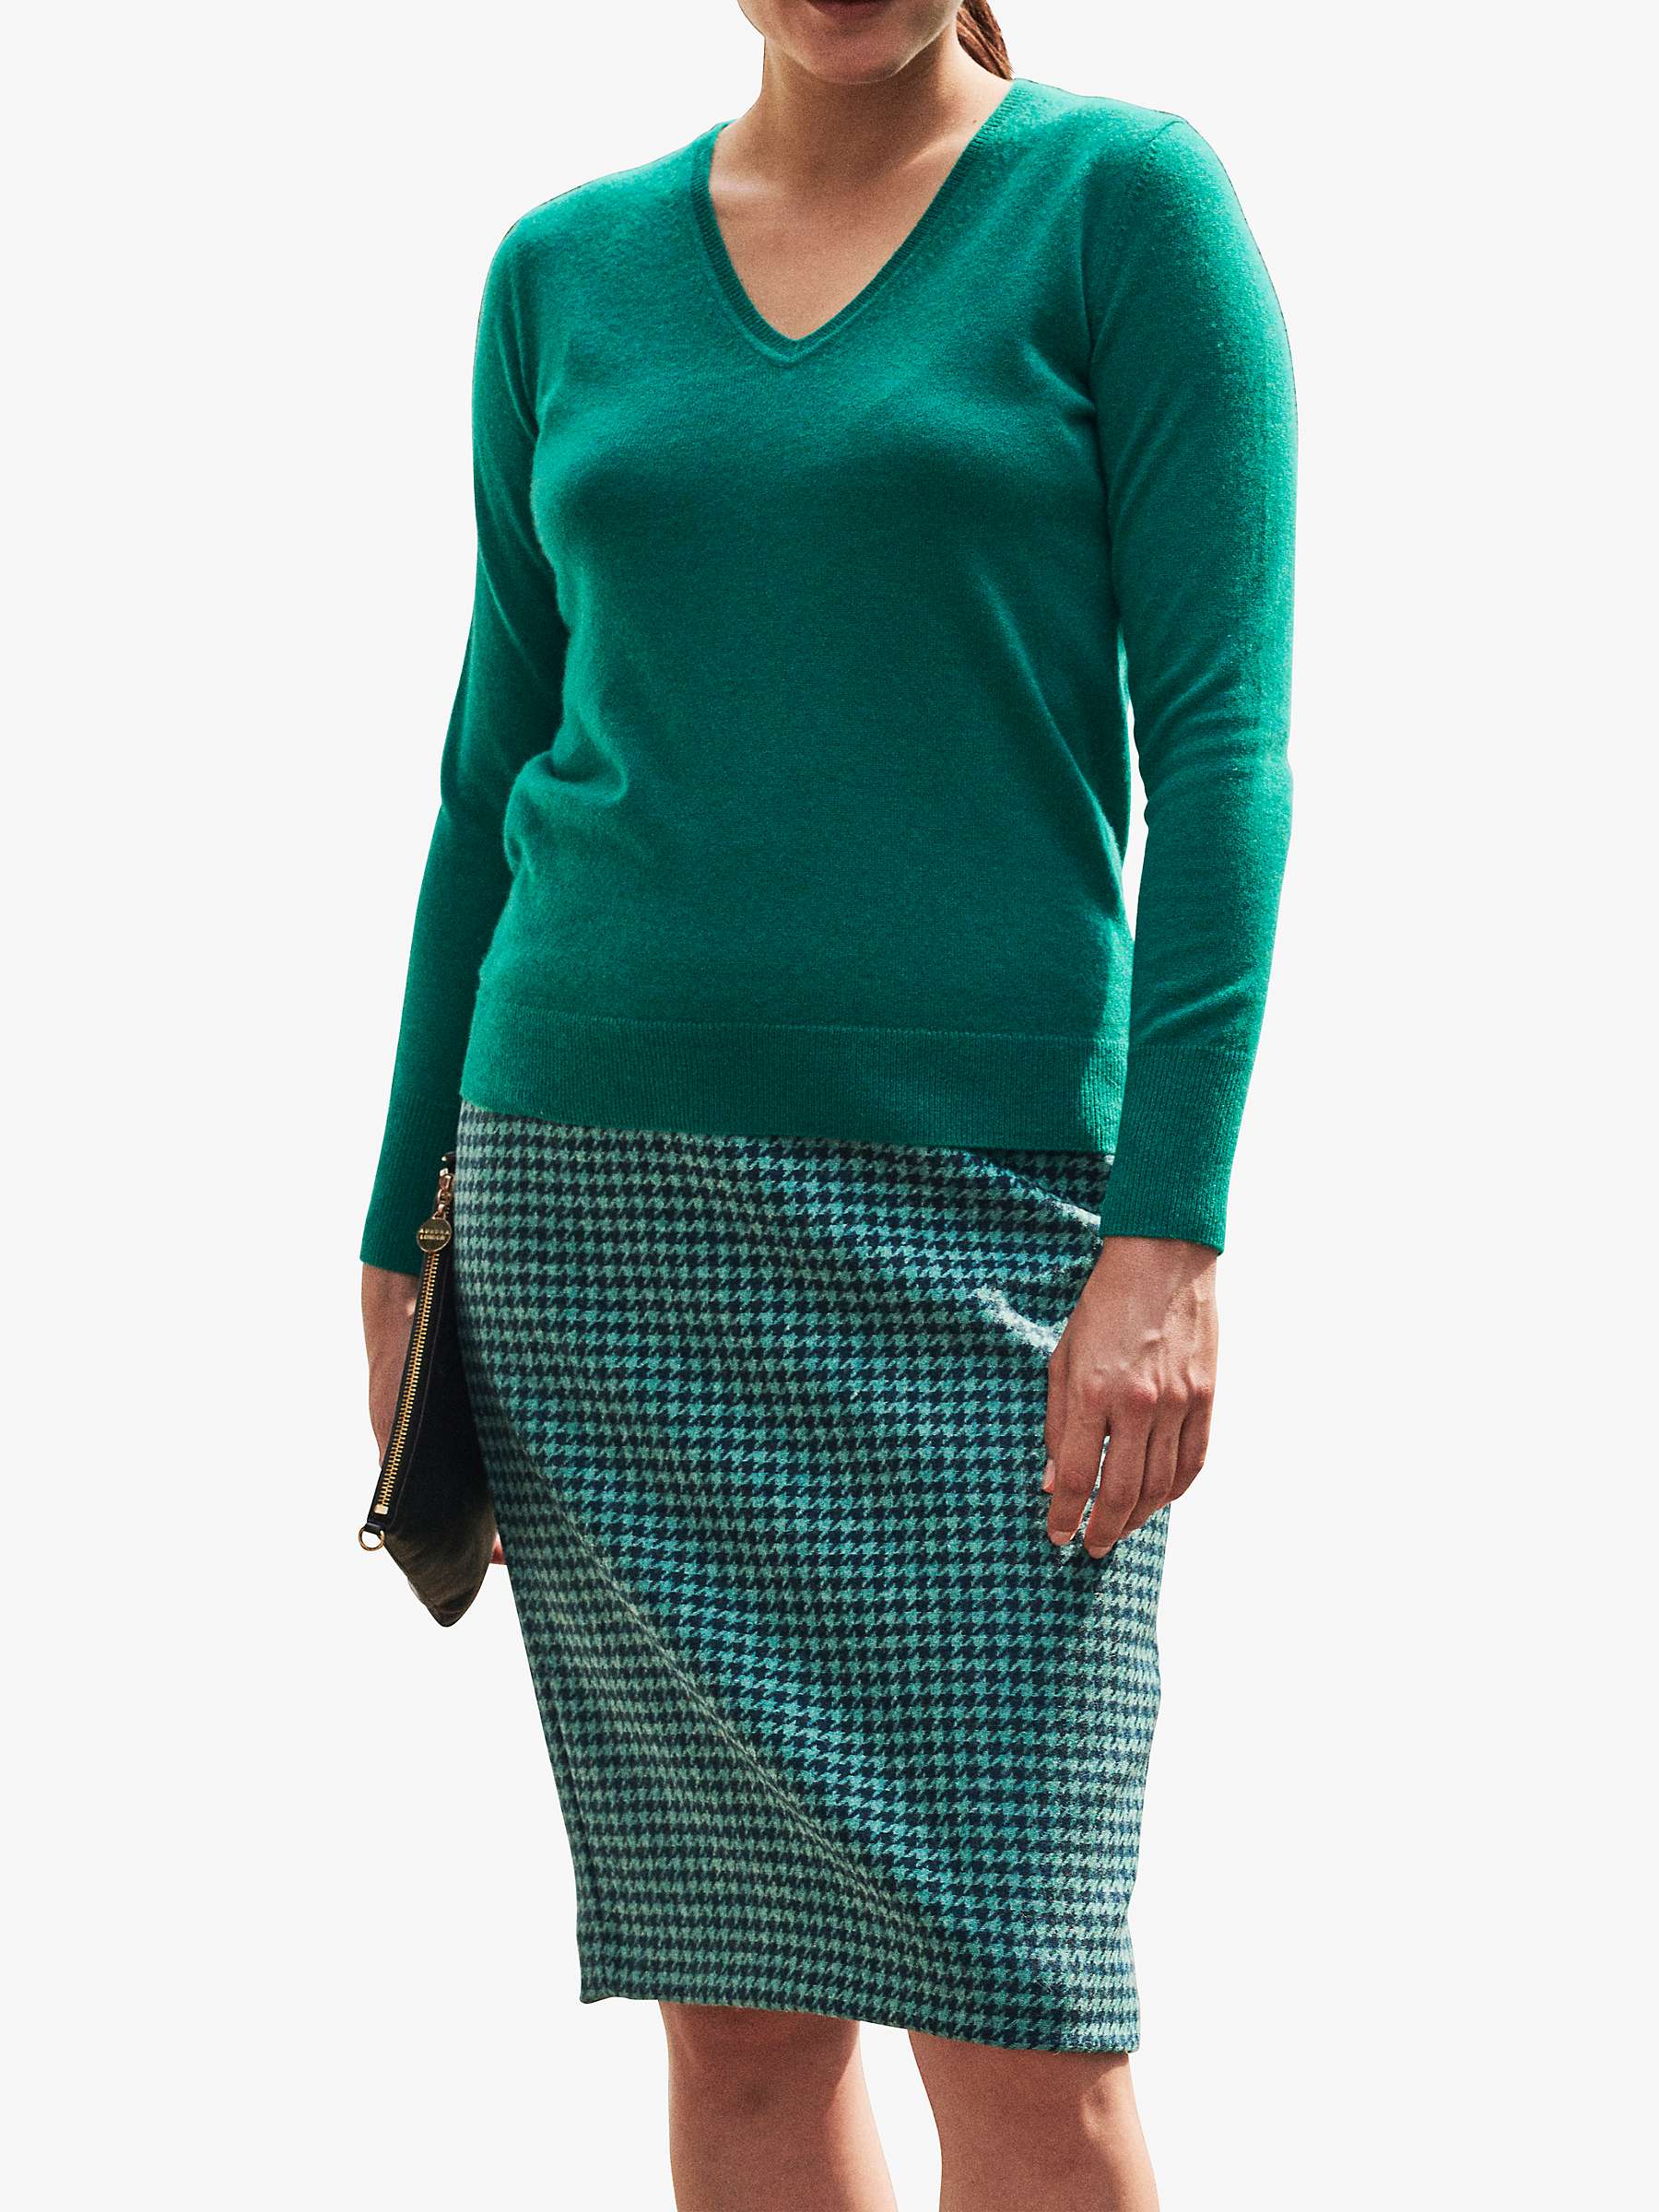 Buy Pure Collection Cashmere V-Neck Sweater, Emerald Online at johnlewis.com